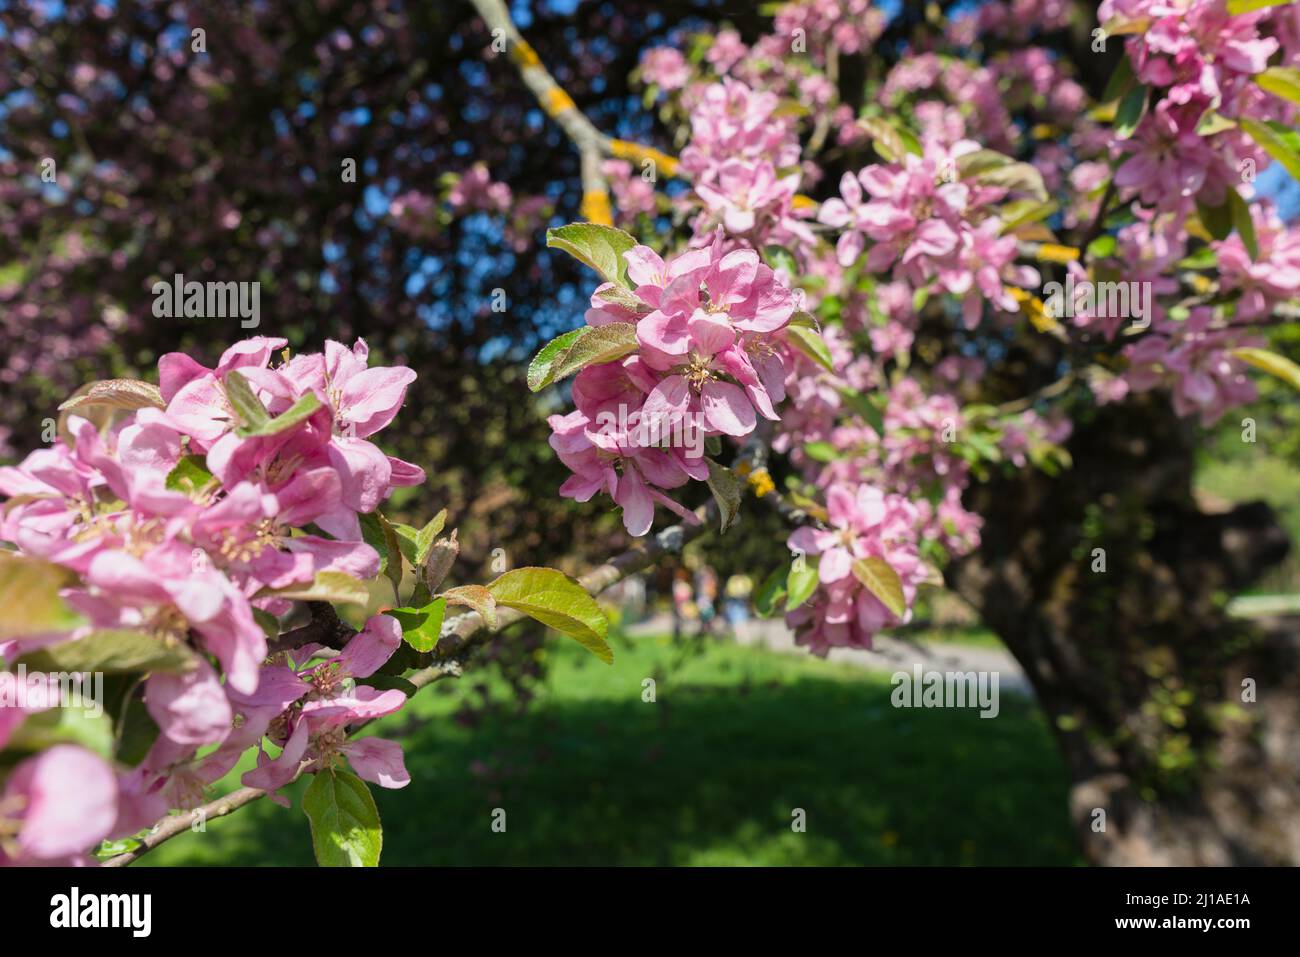 close view of Malus niedzwetzkyana, or Niedzwetzky's apple tree branches in bloom on sunny spring day Stock Photo